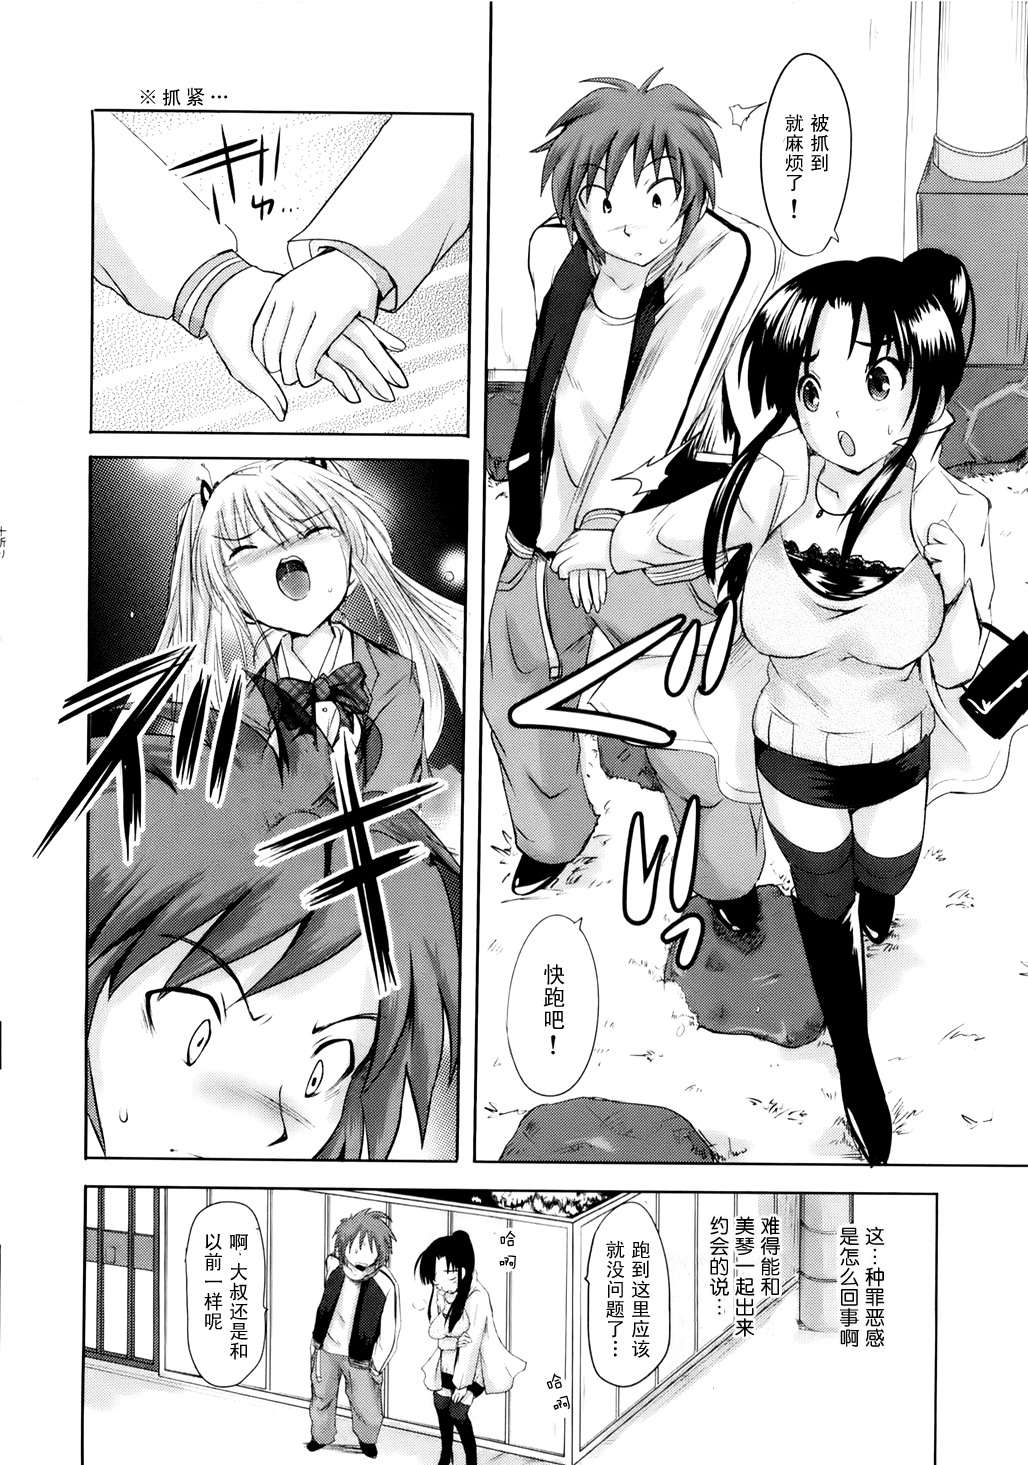 [Natsume Fumika] Sundere! Ch.8 [Chinese] [夏目文花] スンデレ! CH8 [中文翻譯]